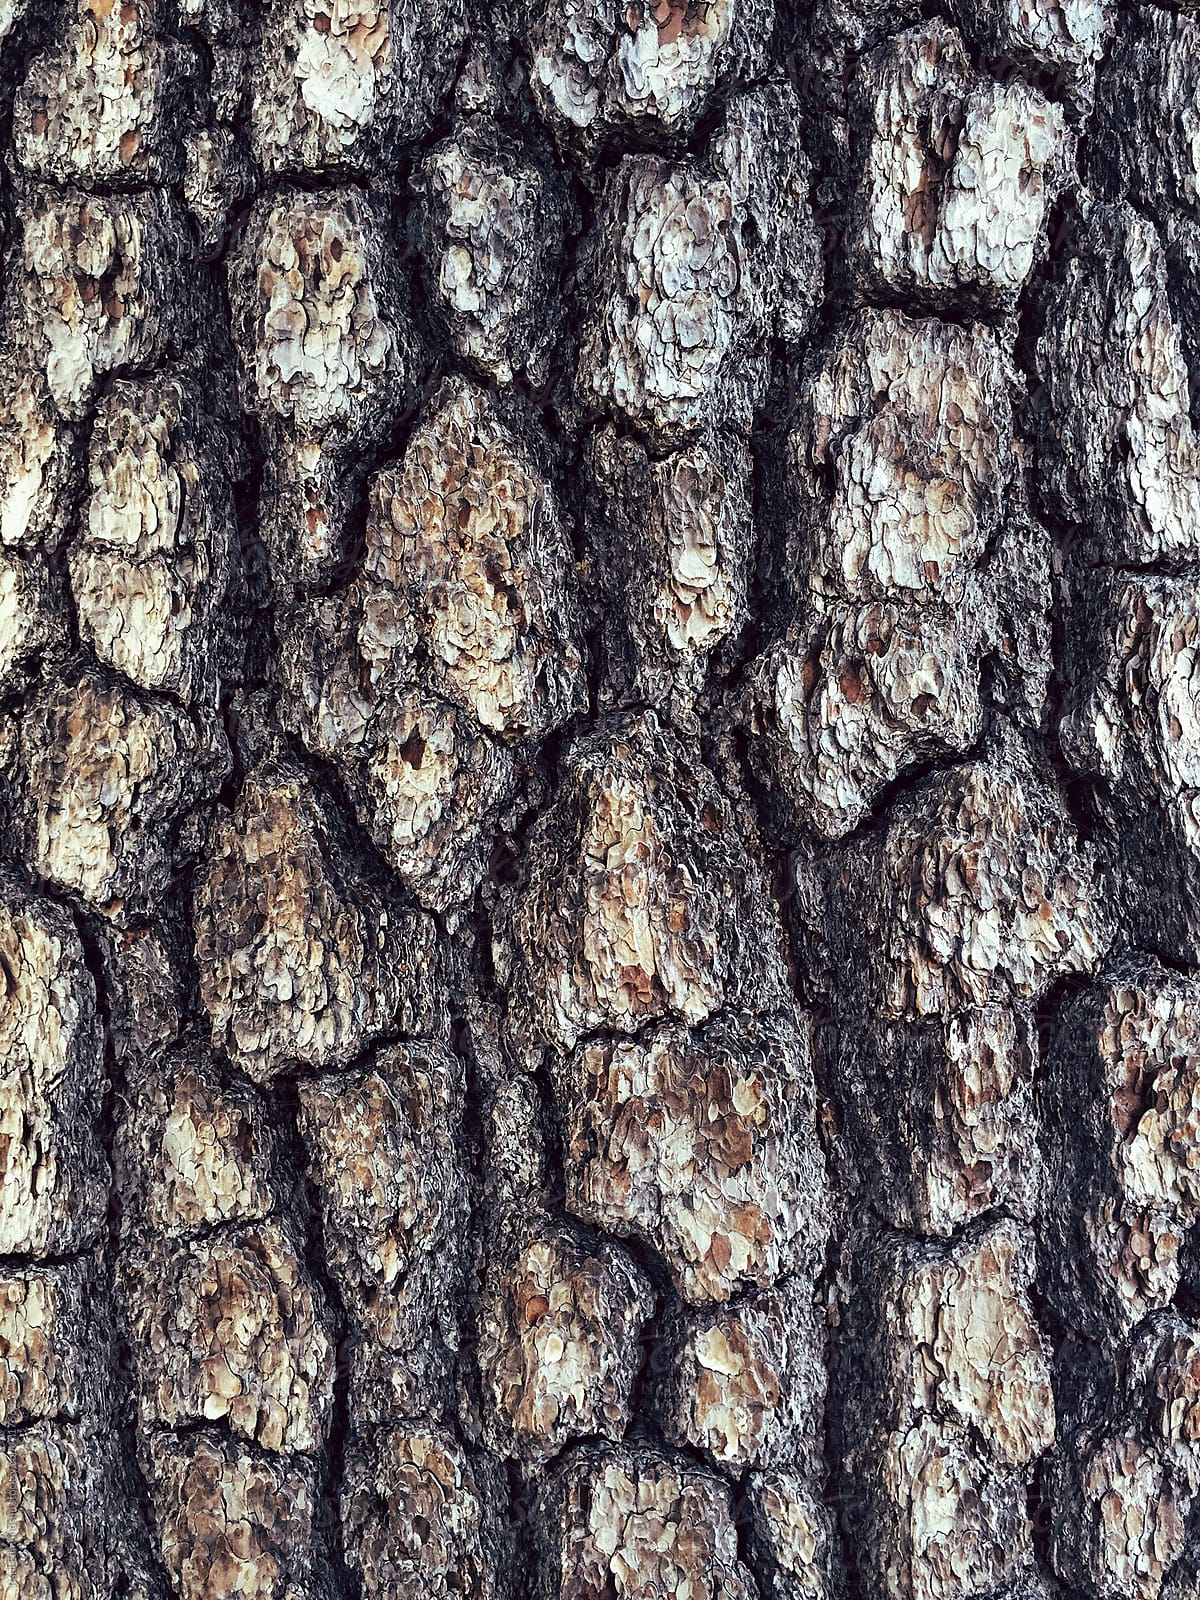 Close up of bark from old growth pine tree